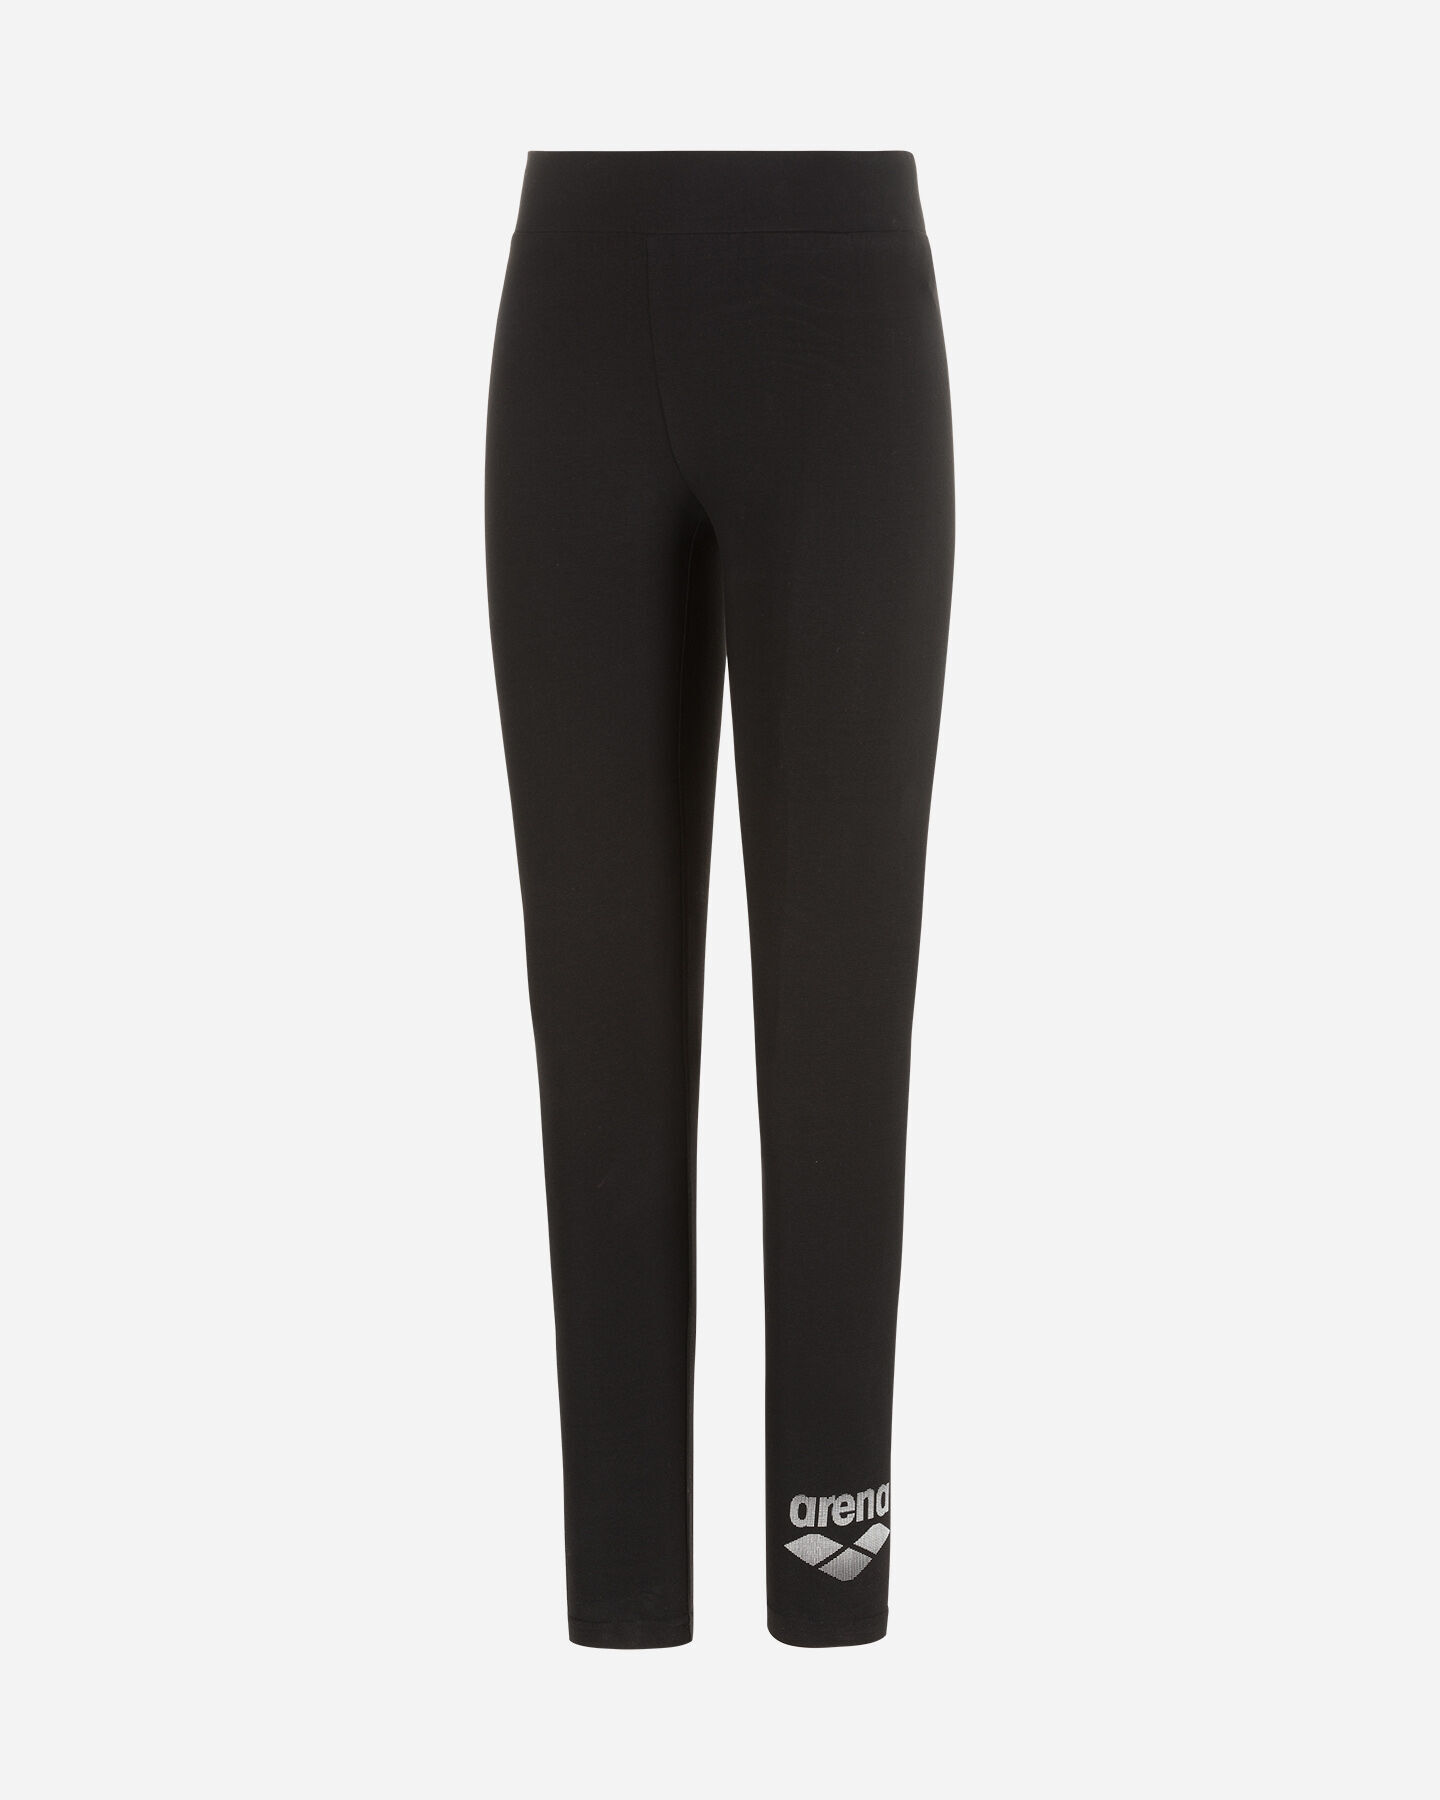  Leggings ARENA JSTRETCH PERFORM W S4087556|050|XS scatto 4